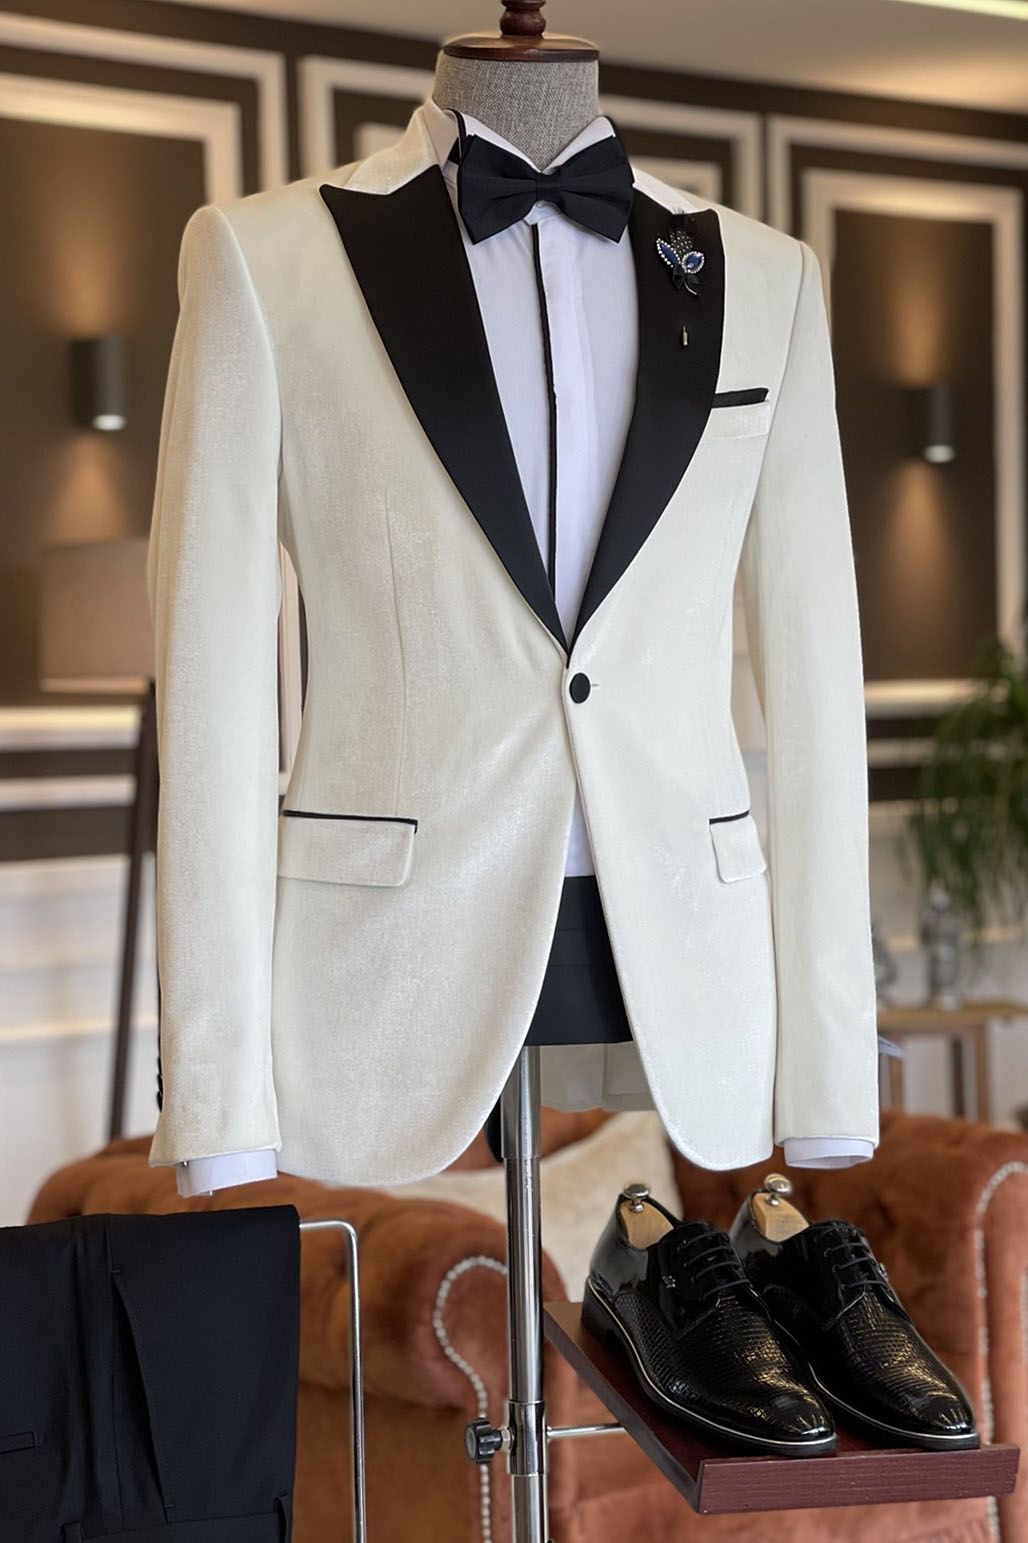 Dresseswow Handsome Two Pieces White Suit For Reception With Peaked Lapel Online